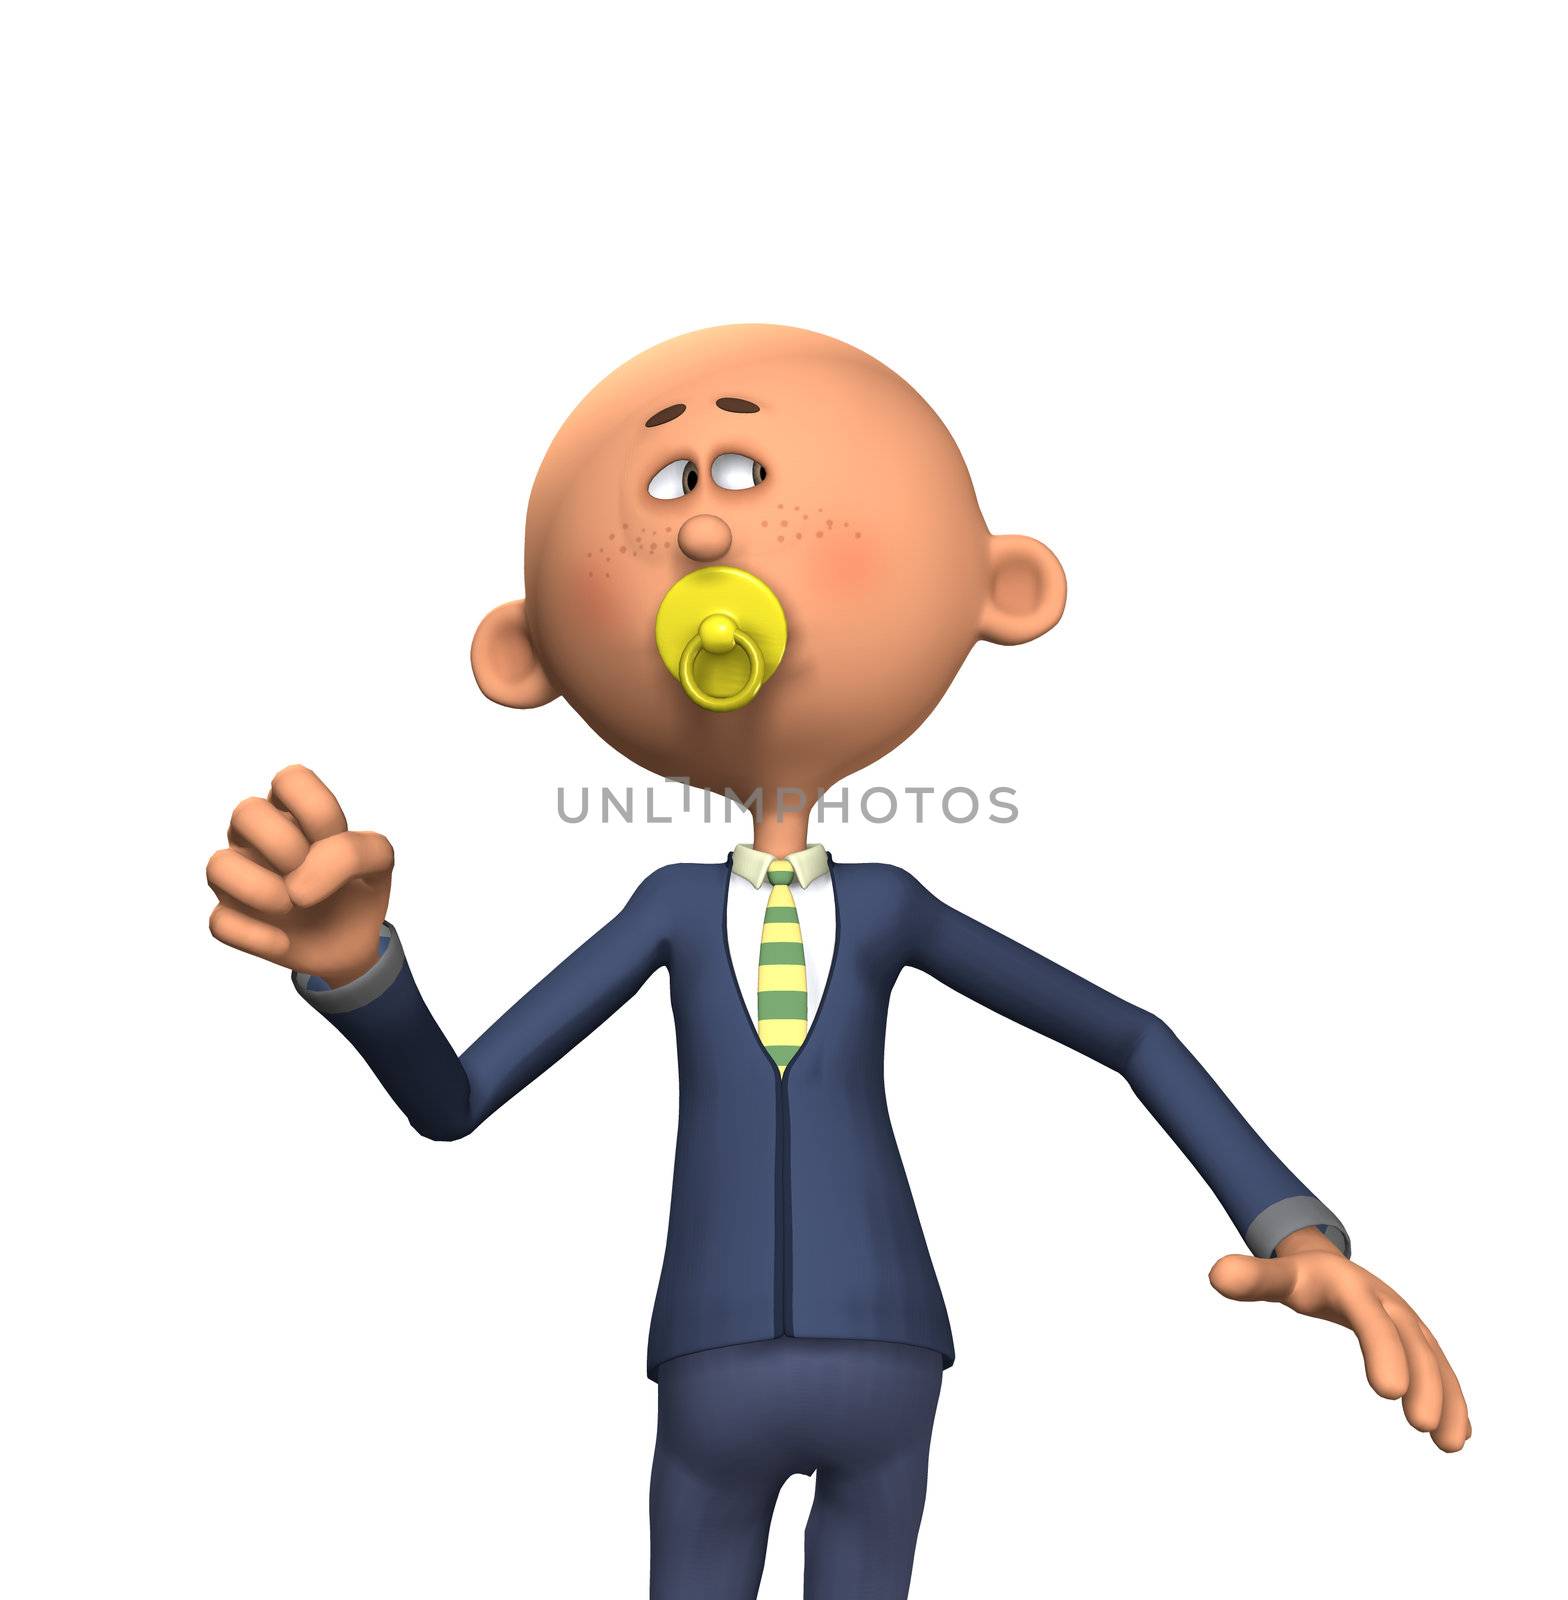 Humorous concept image showing a  business man sucking on a babies dummy.
